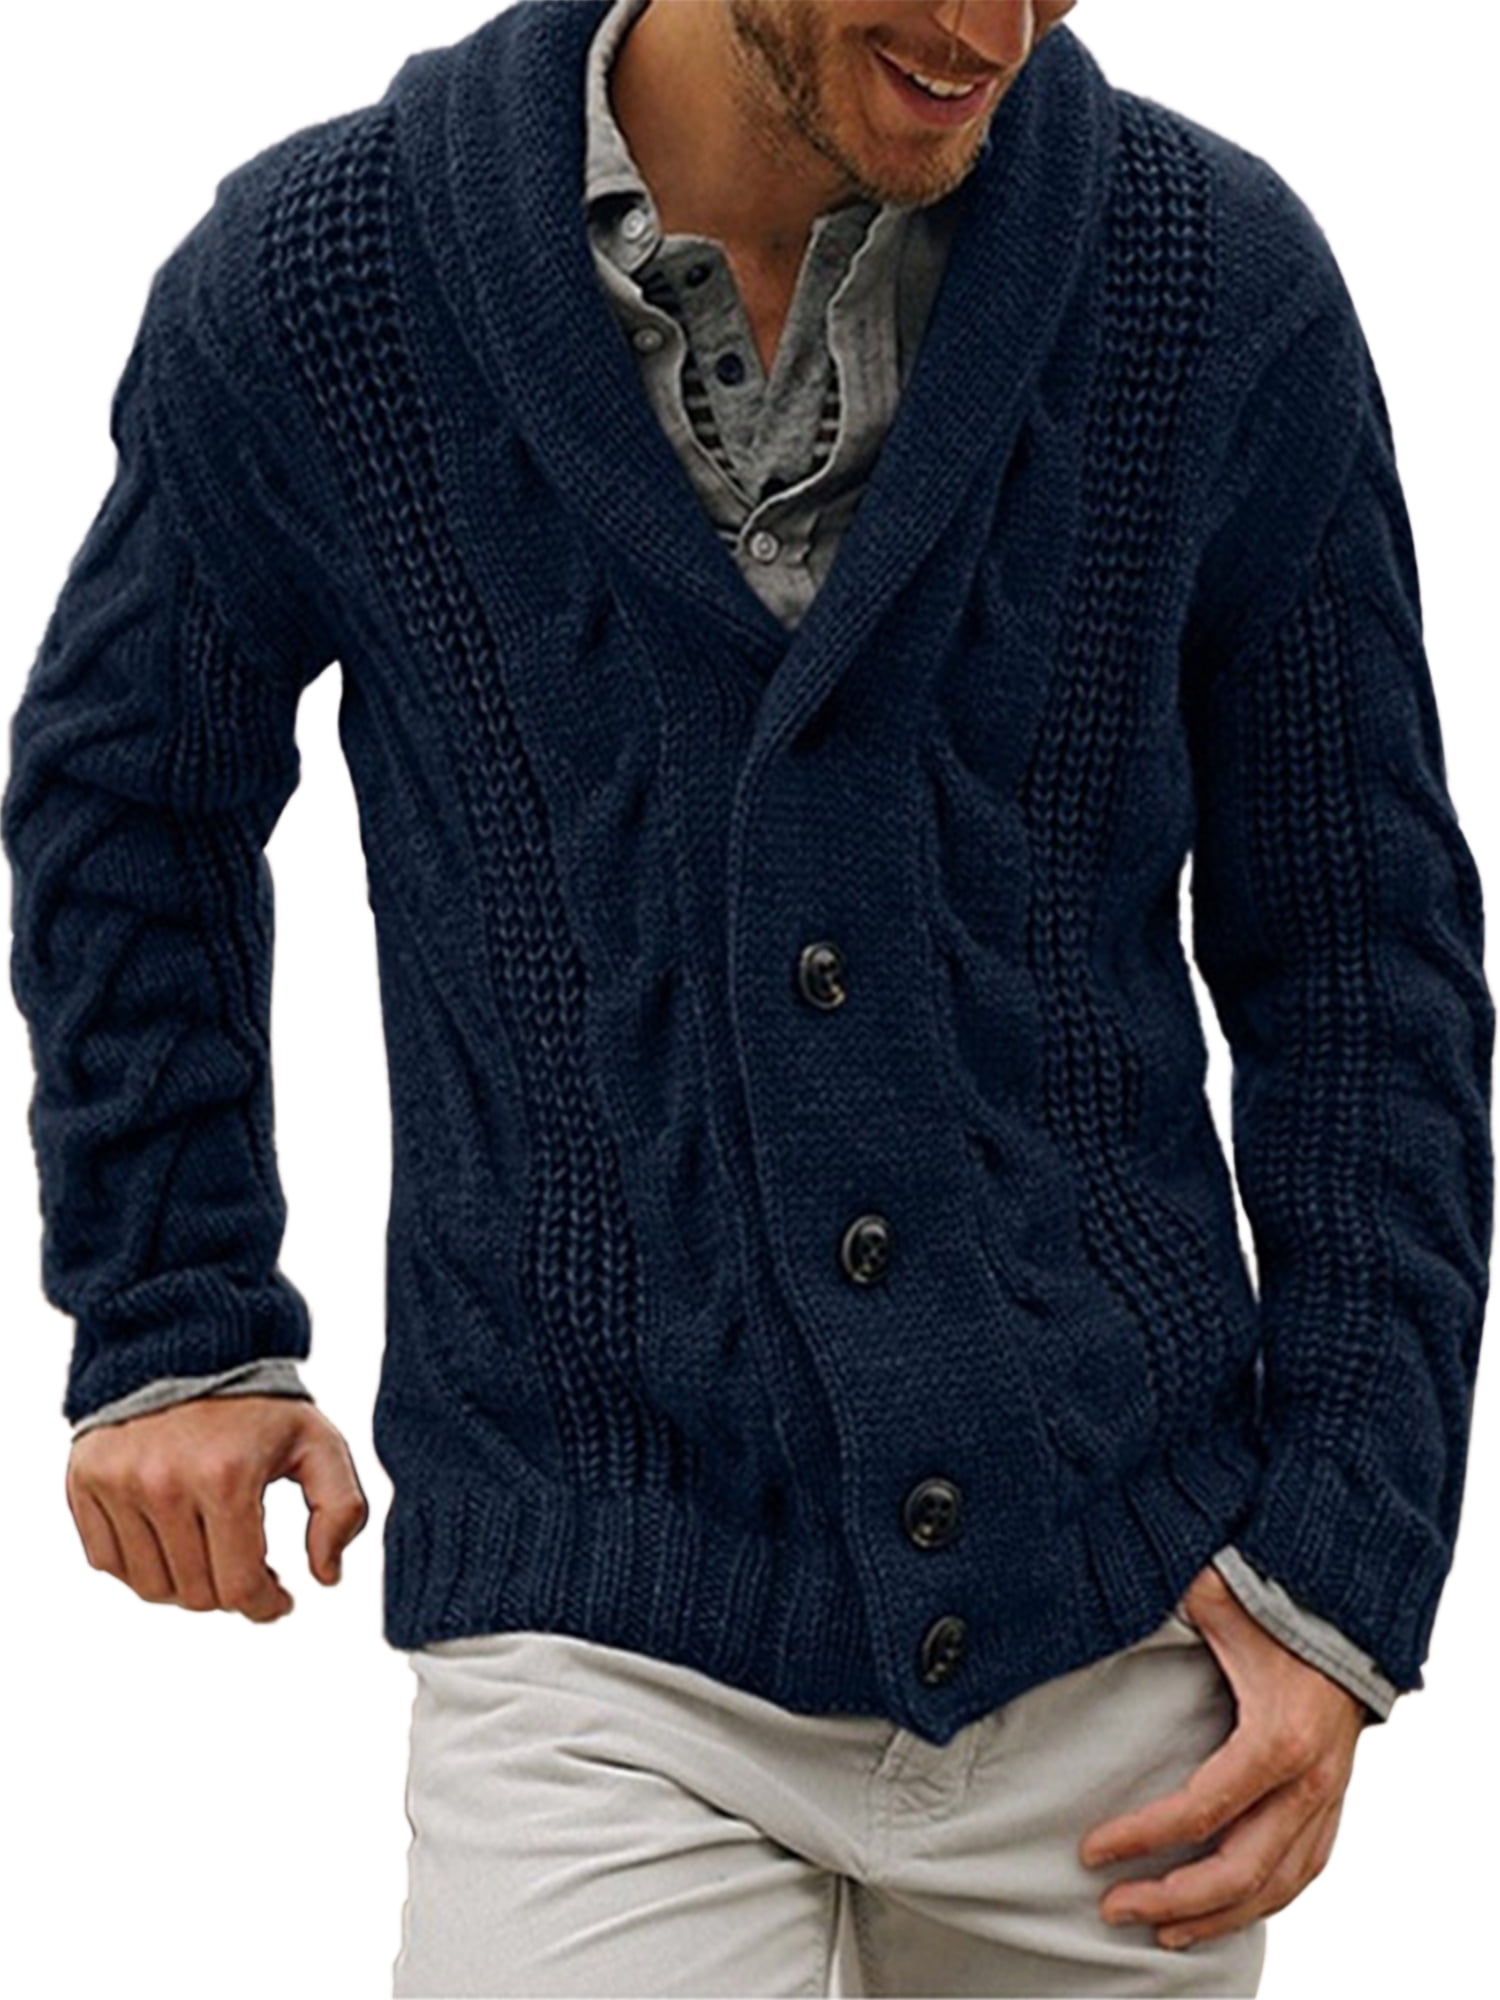 SELX Men Casual Button Down Solid Long Sleeves Wool Knit Cardigan Sweaters 